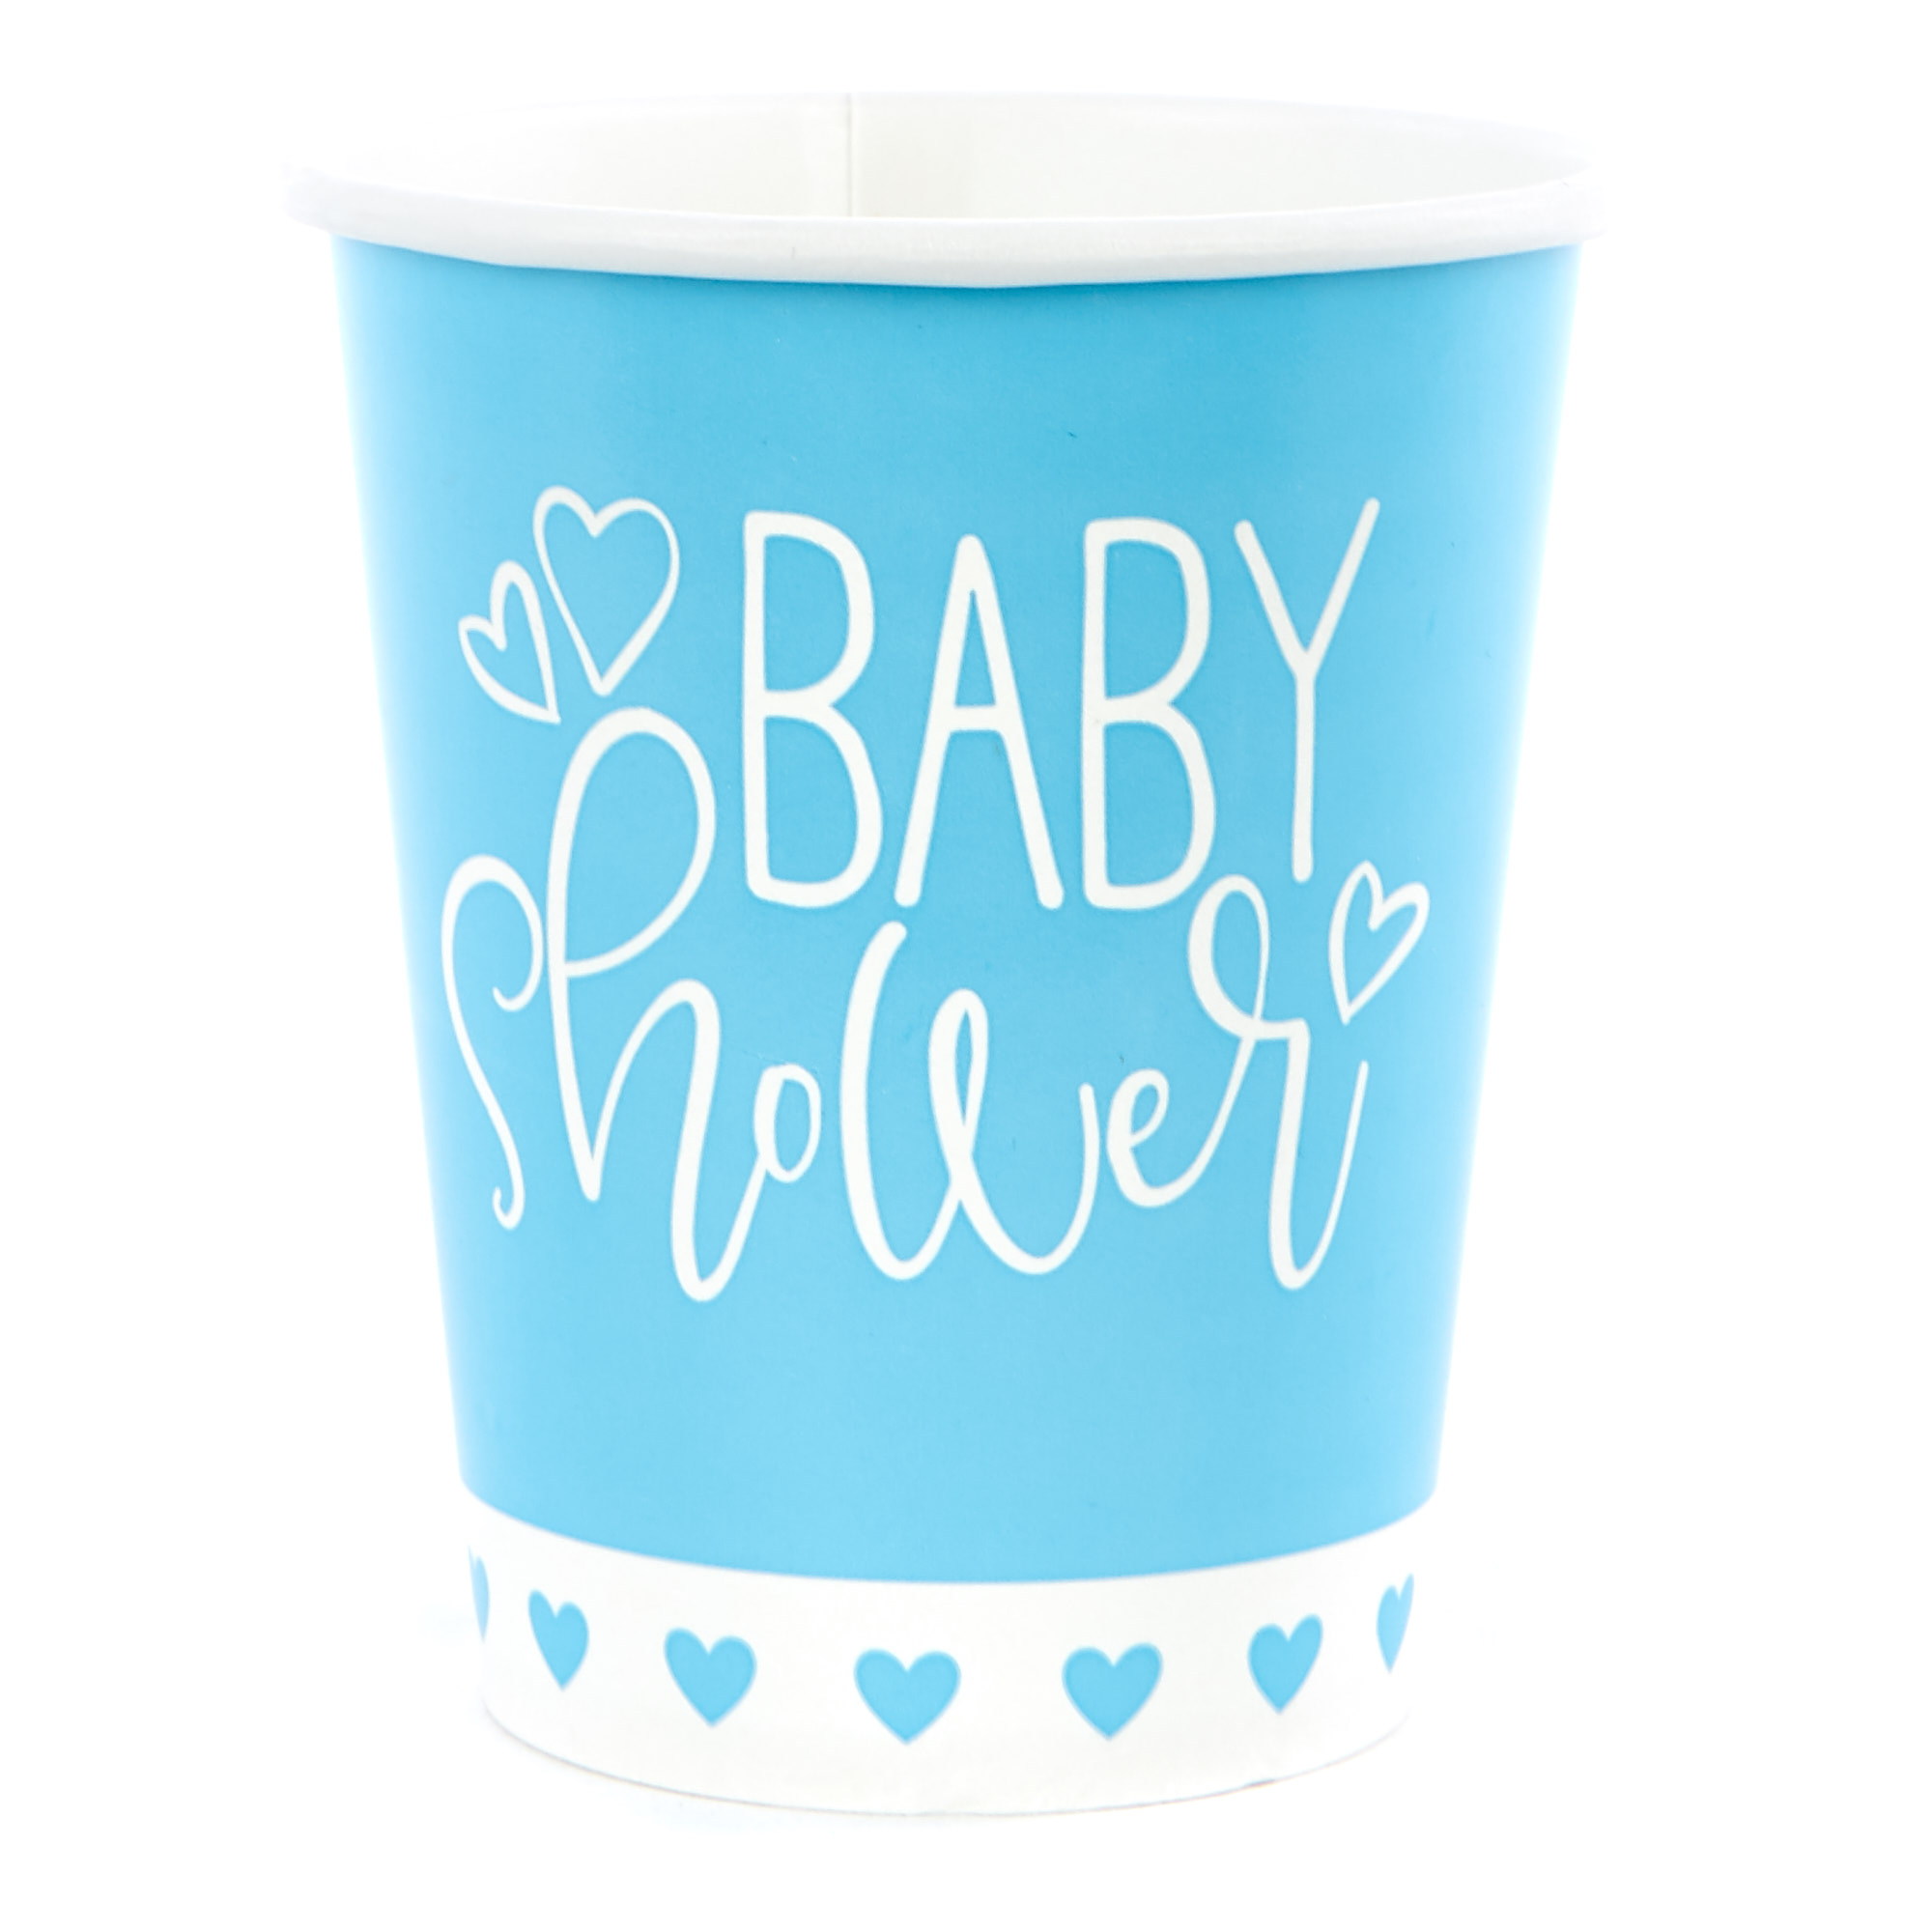 Blue Baby Shower Tableware & Decorations Party Bundle - 16 Guests